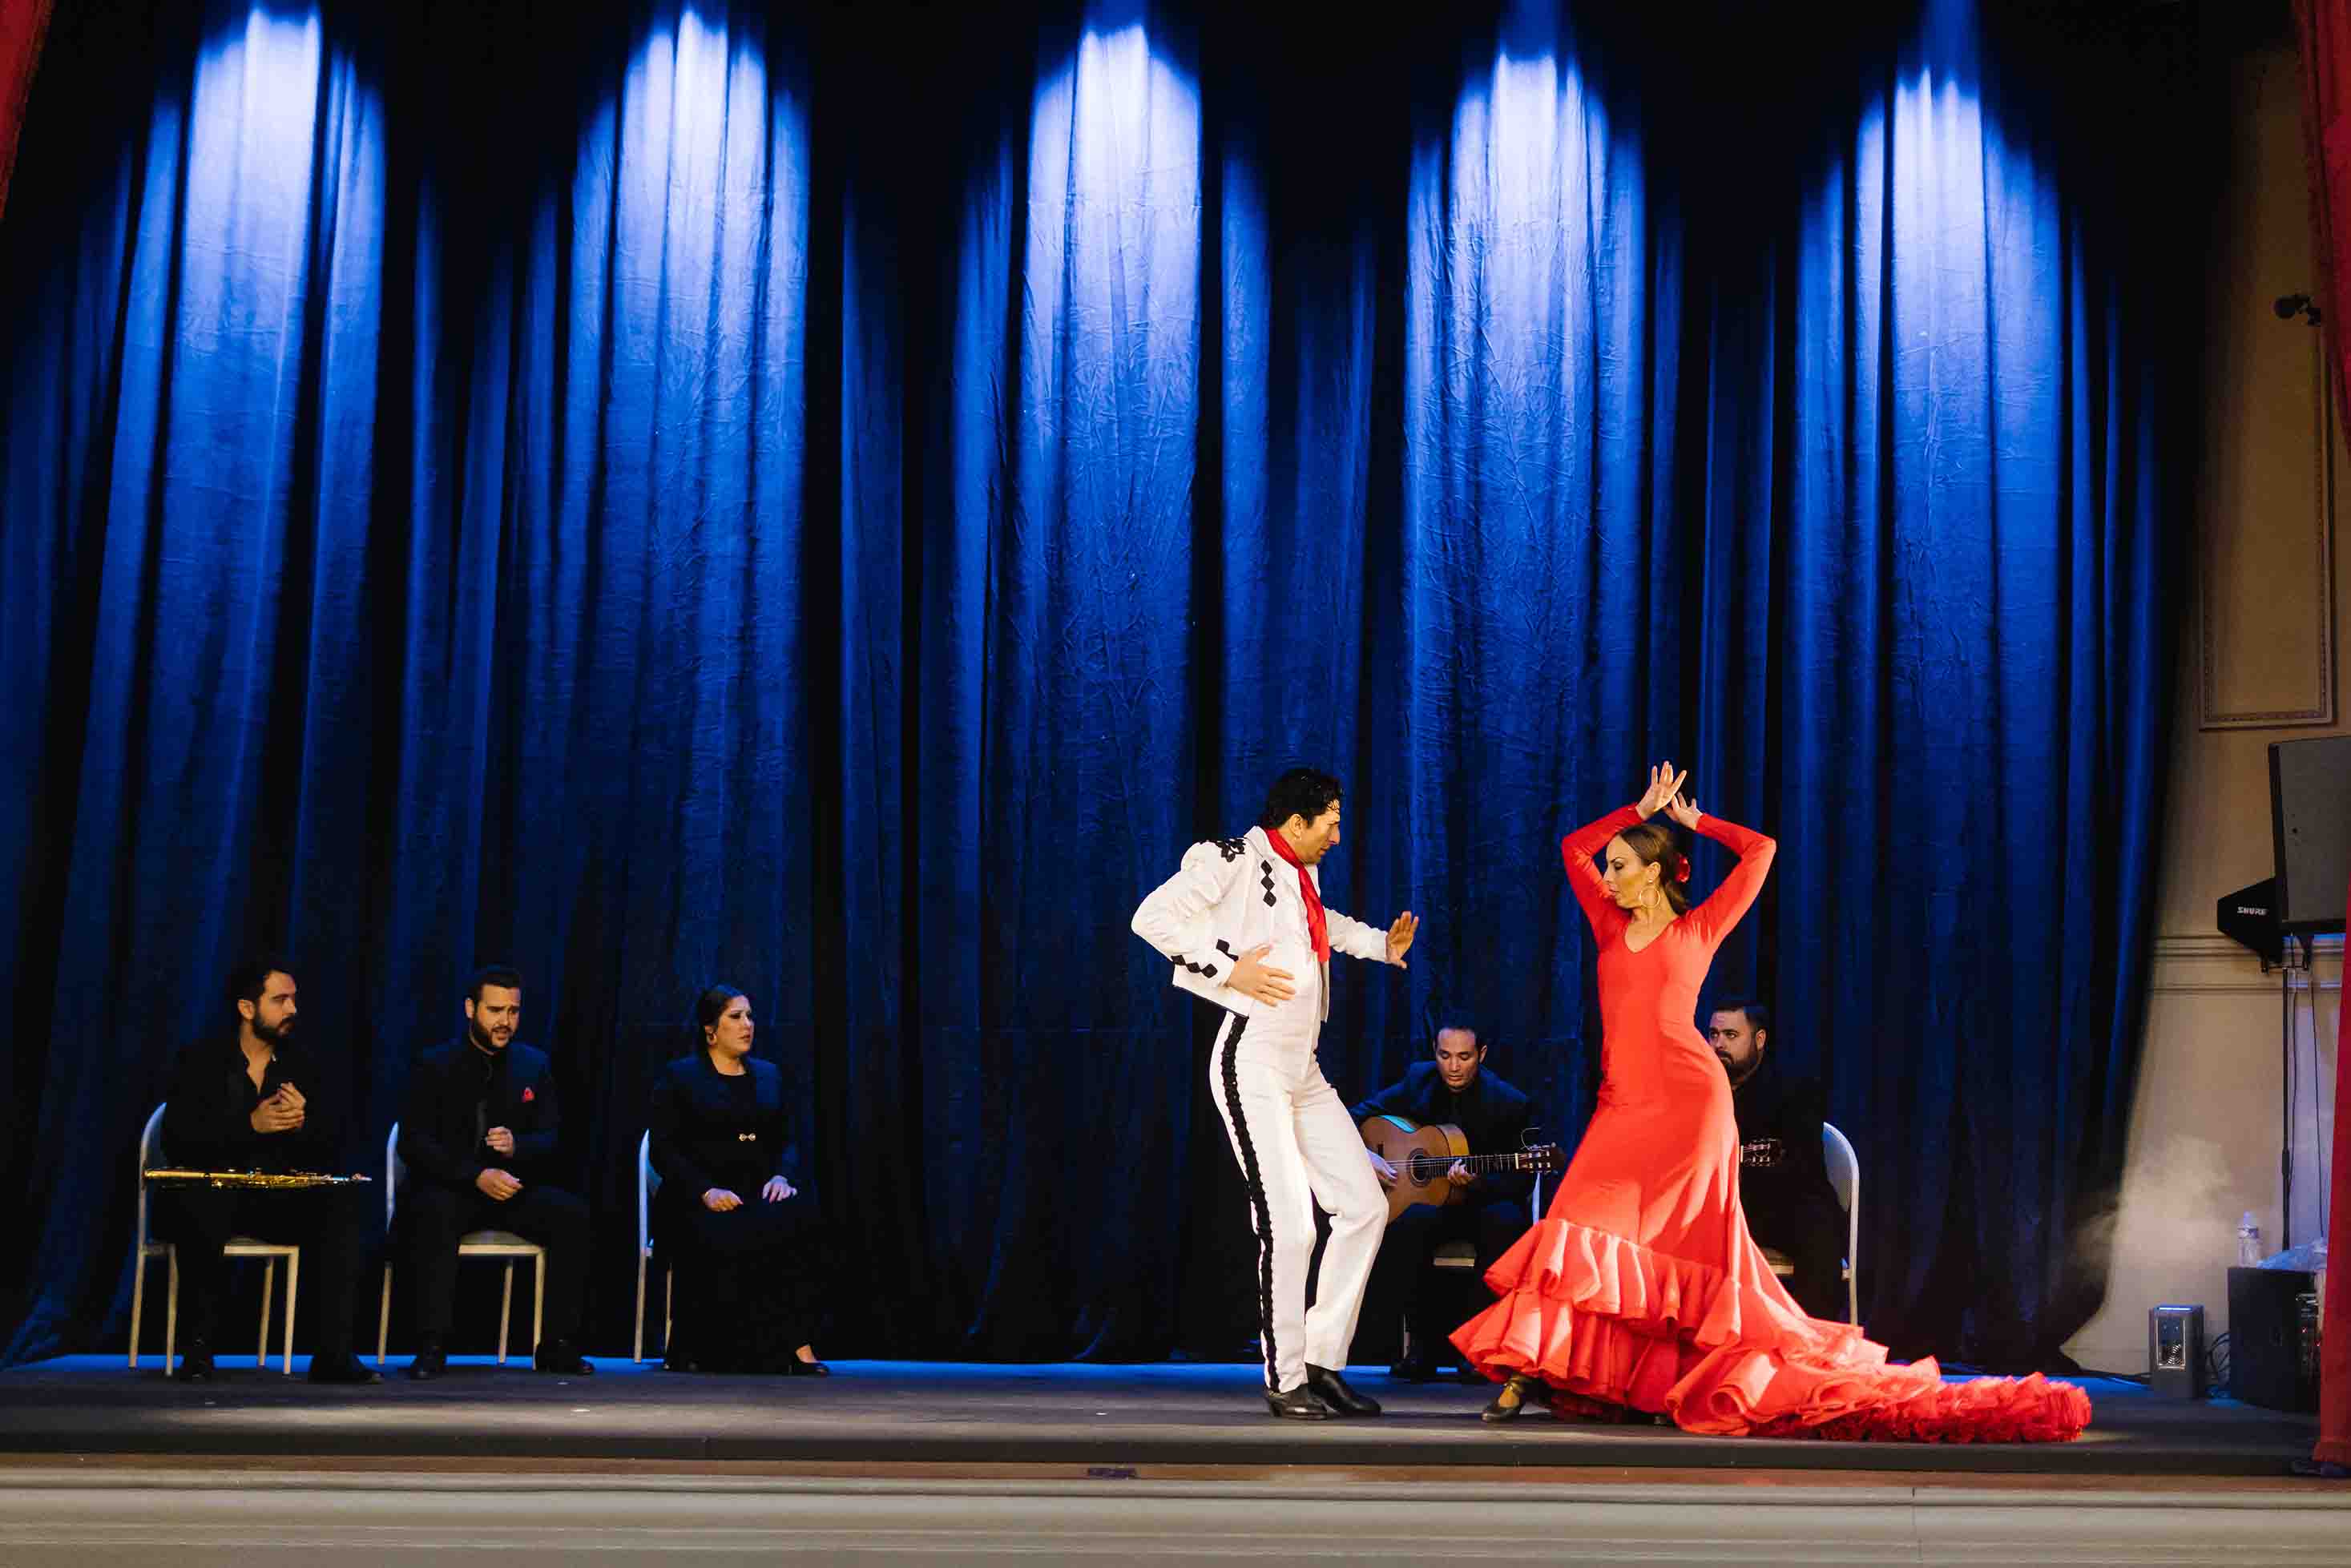 A man dancing flamenco at the Authentic Flamenco show in NYC - Authentic Flamenco in Montreal: A Traditional Spanish Show